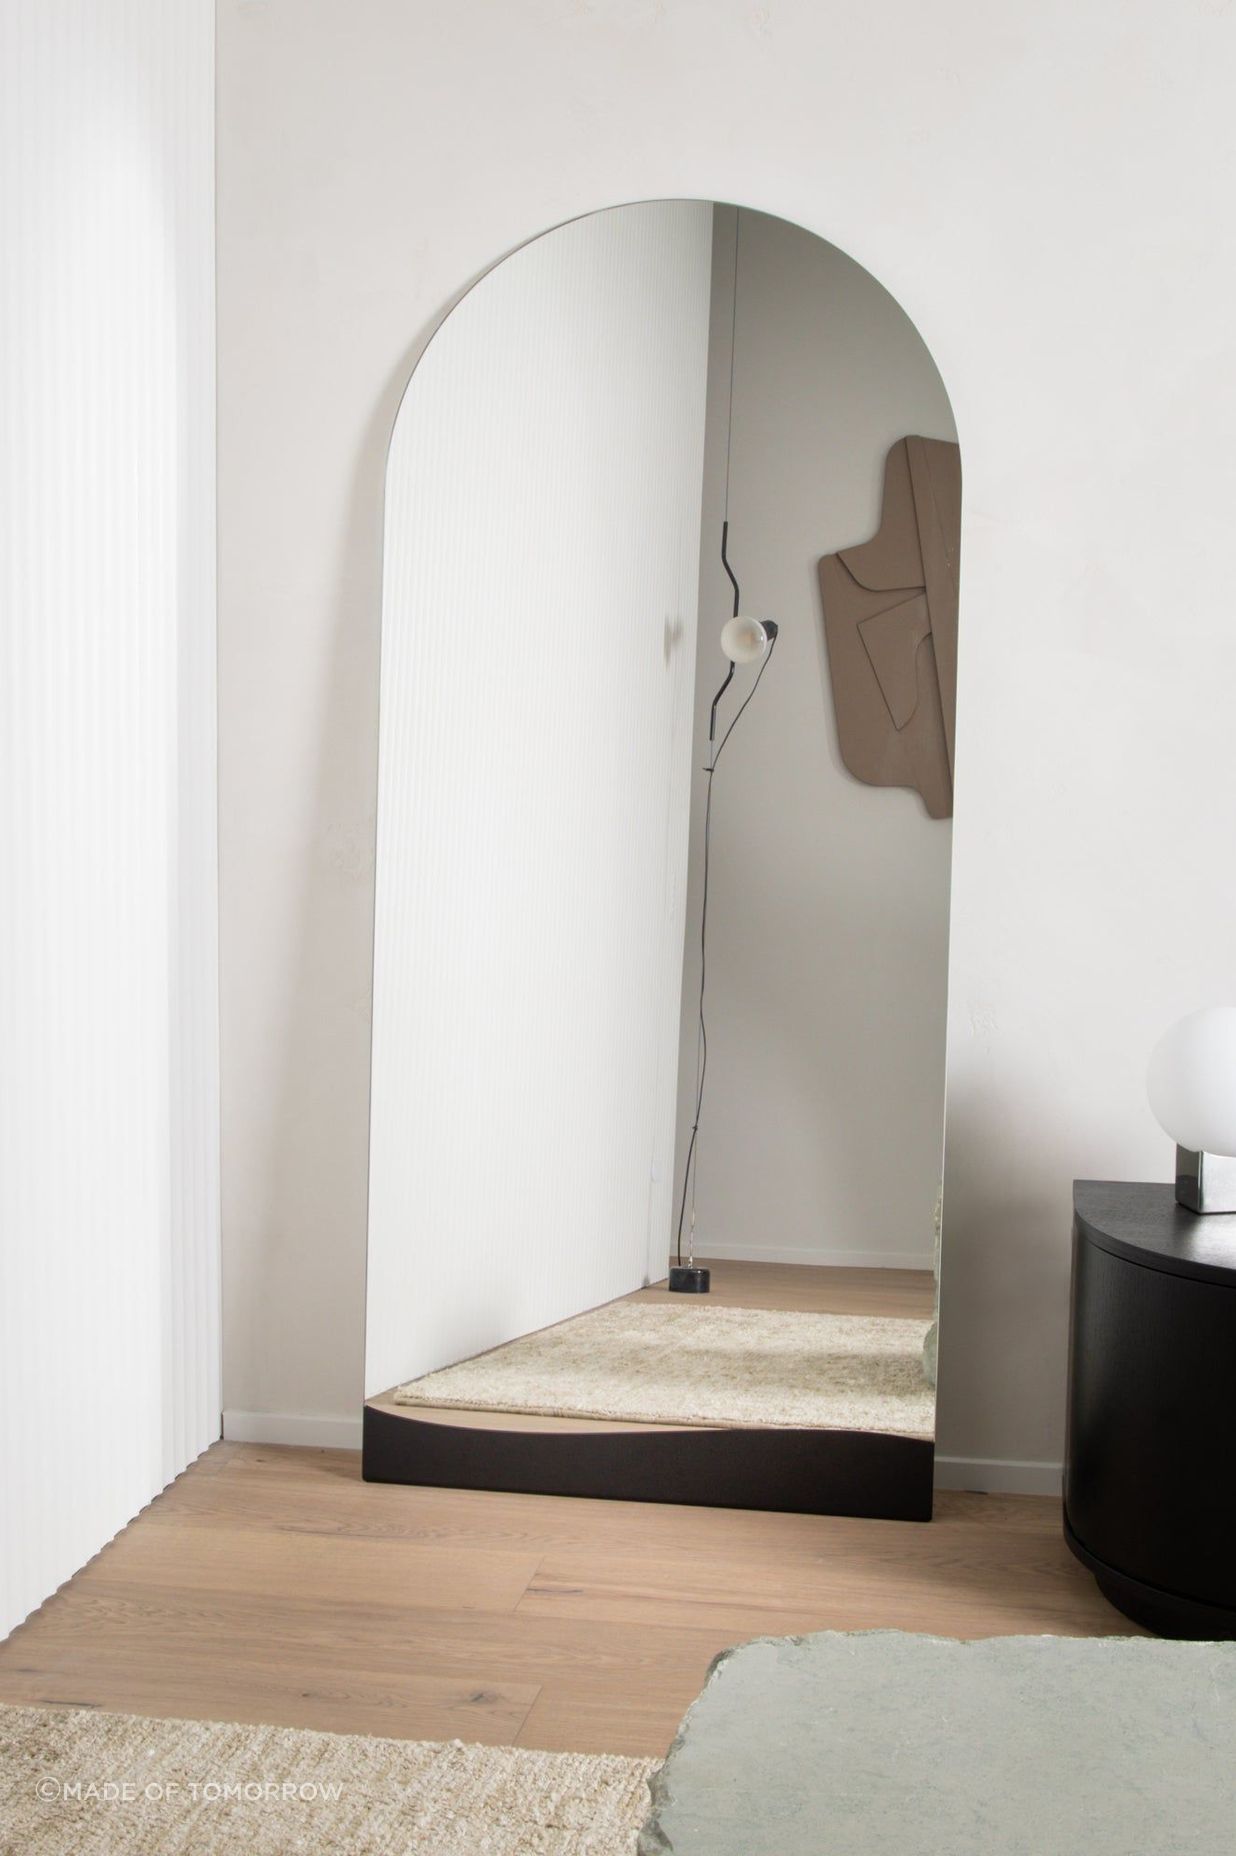 The elegant Arch Full Length Mirror, similarly positioned in a vacant corner.